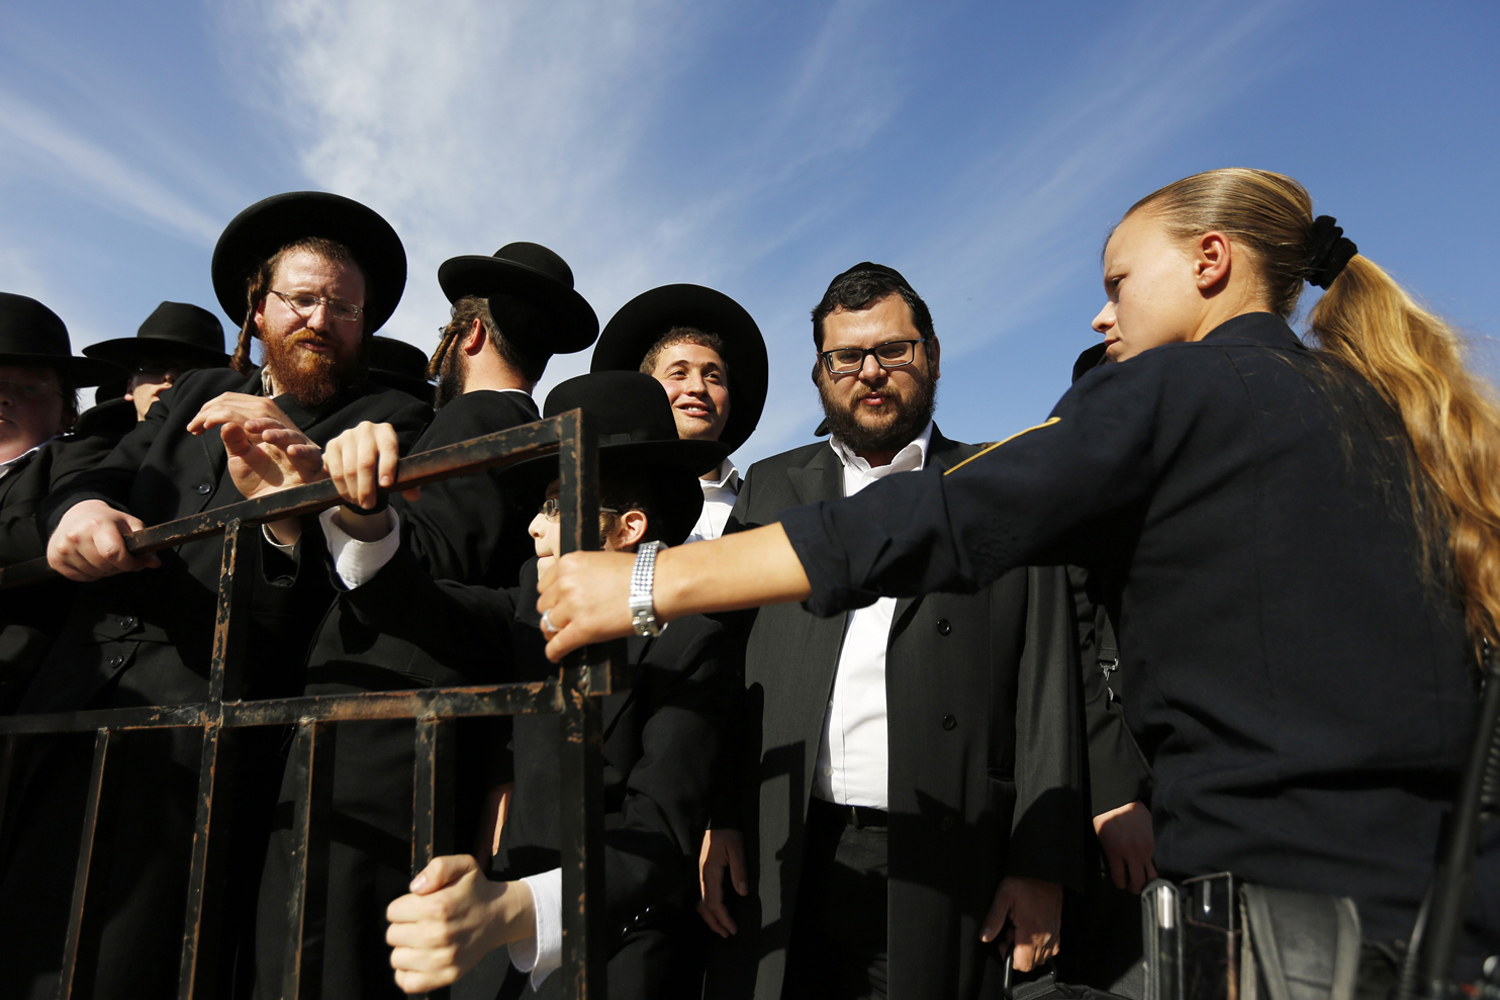 An Israeli policewoman holds back ultra-Orthodox Jewish men as they protest against the "Women of the Wall" group at the Western Wall in Jerusalem's Old City